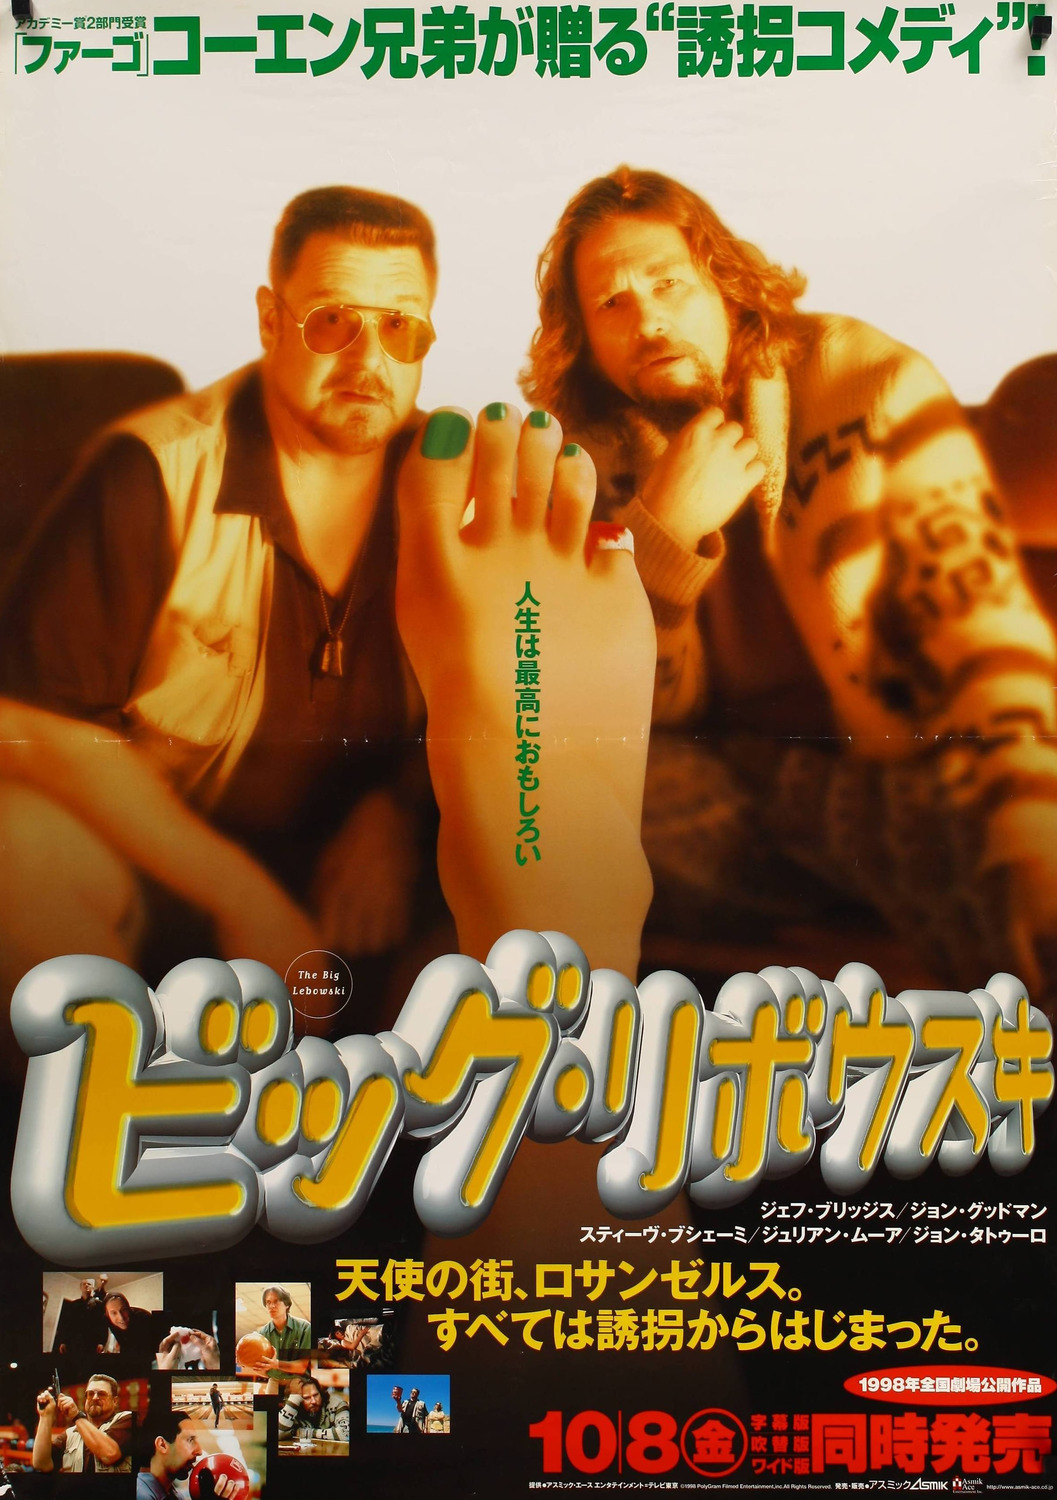 Extra Large Movie Poster Image for The Big Lebowski (#5 of 5)